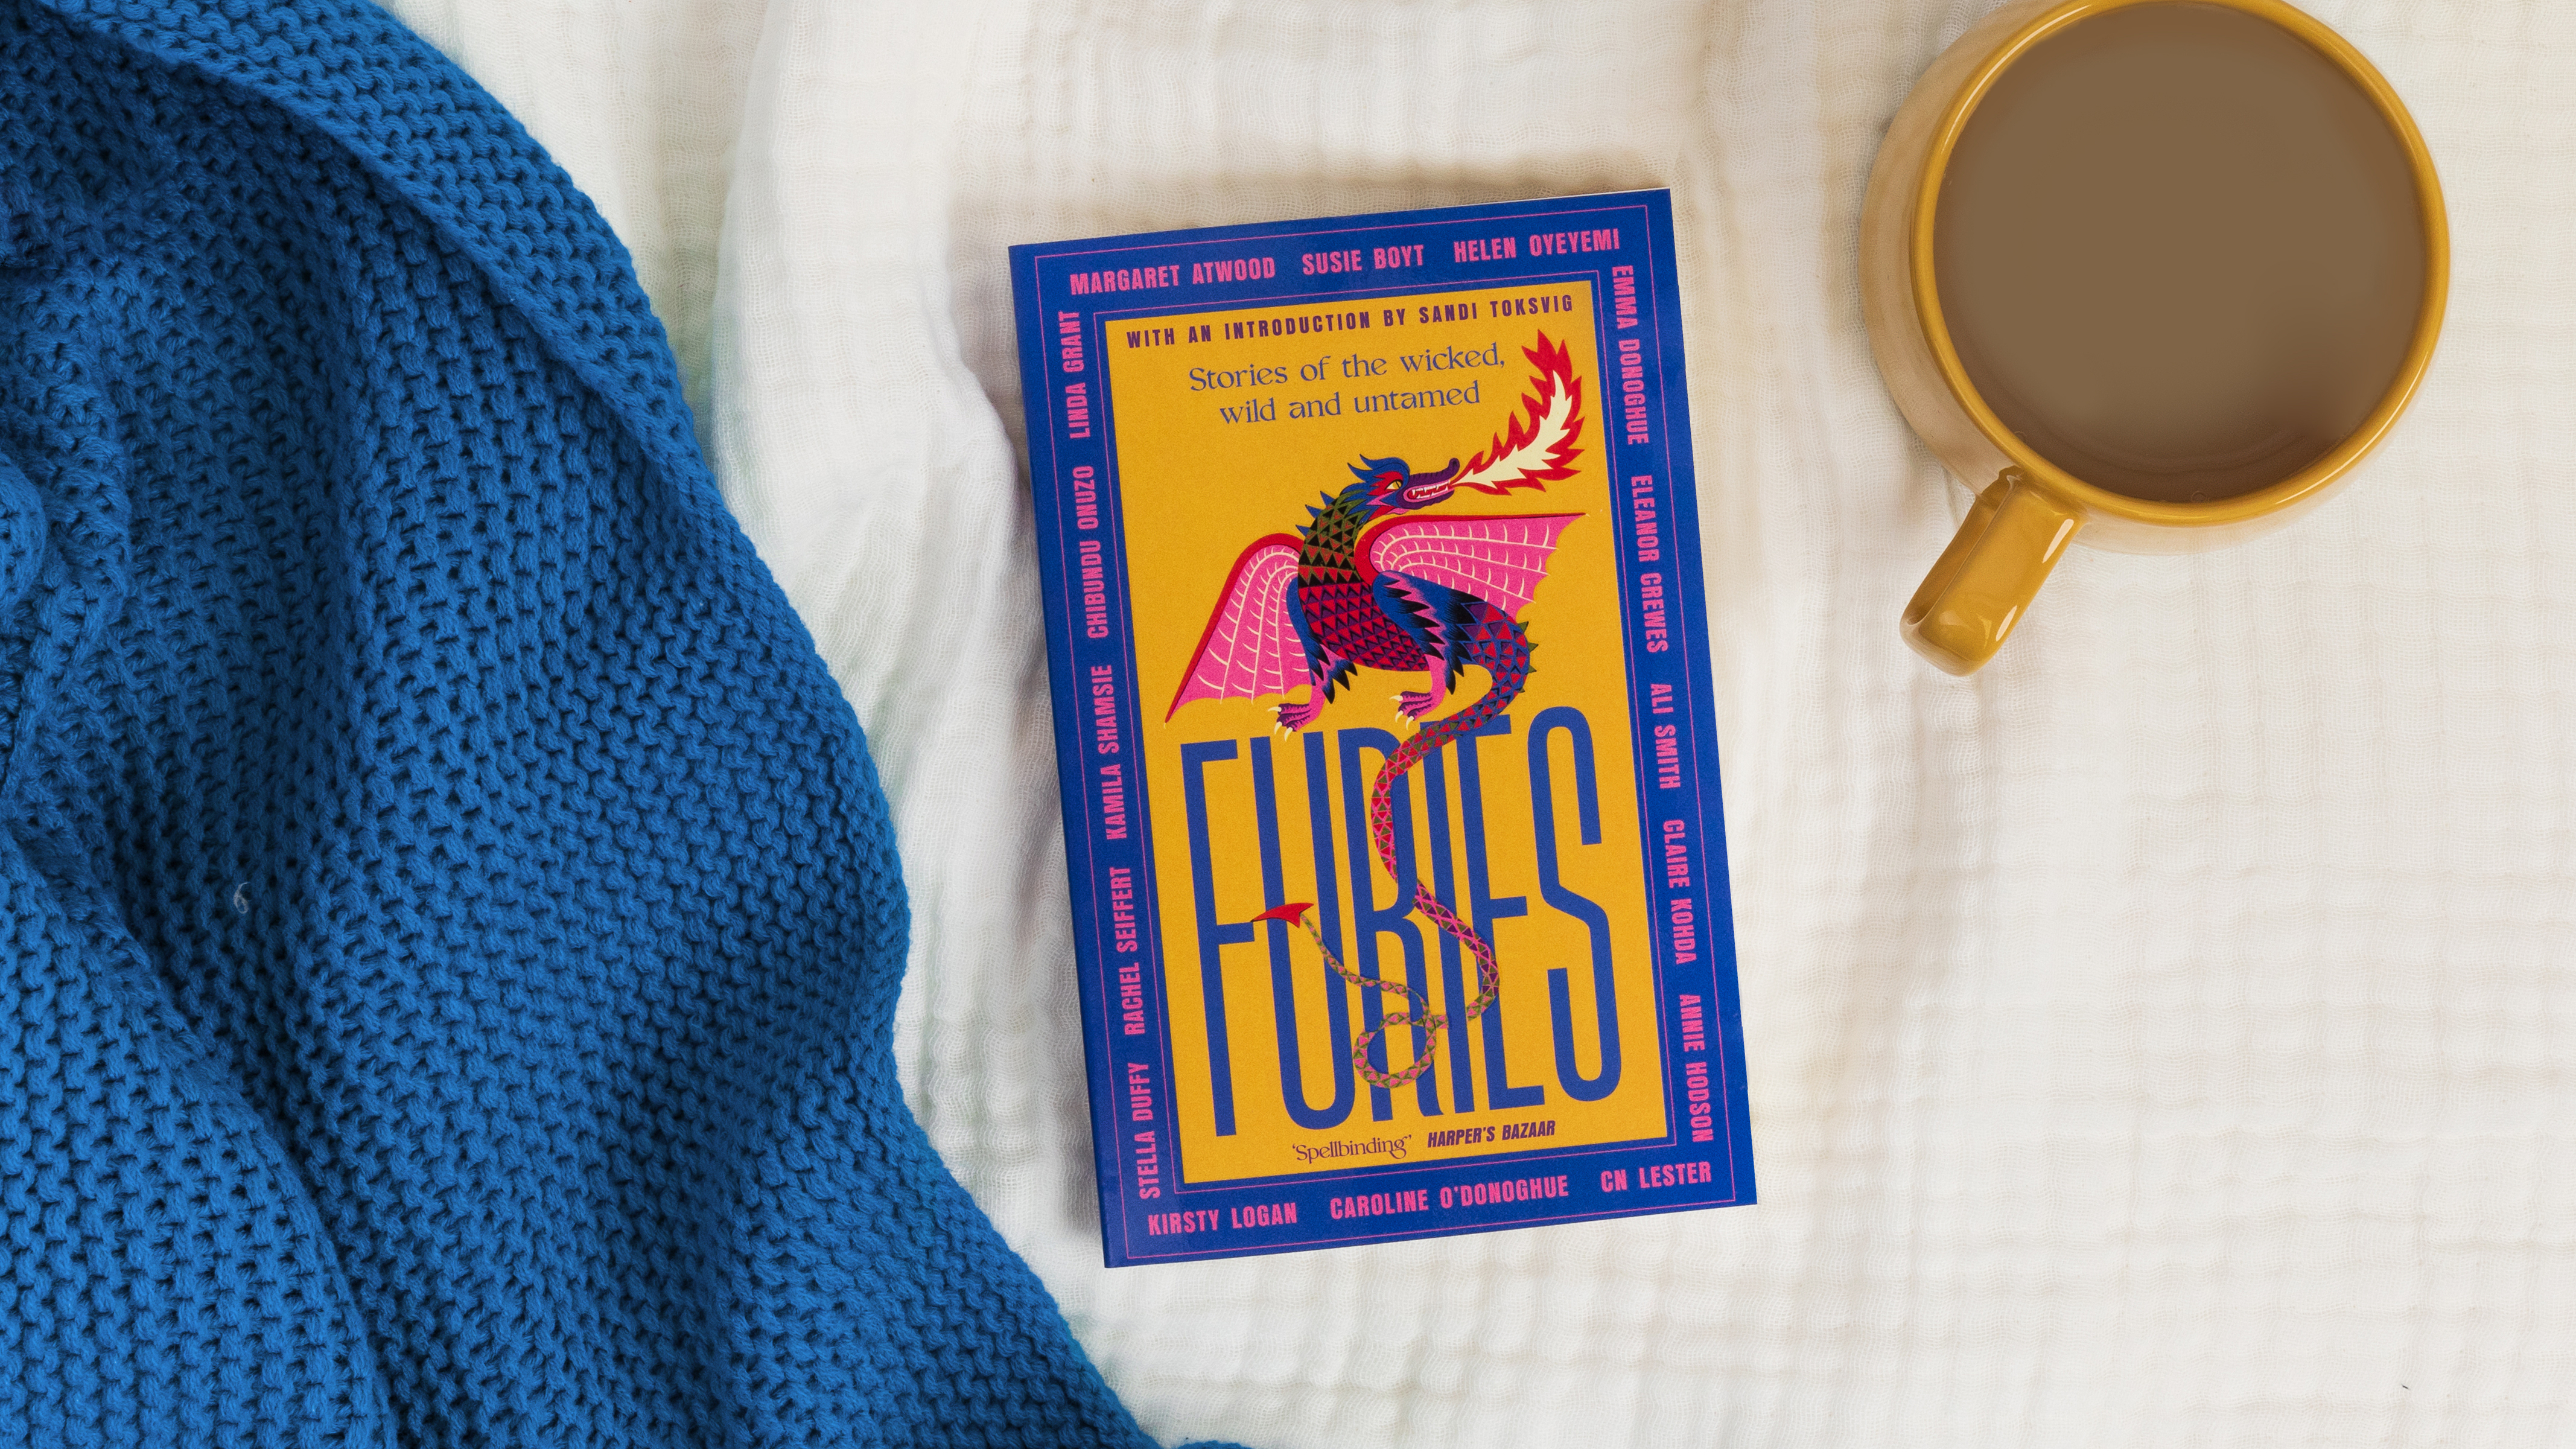 Furies: Wild, Wicked and Untamed stories